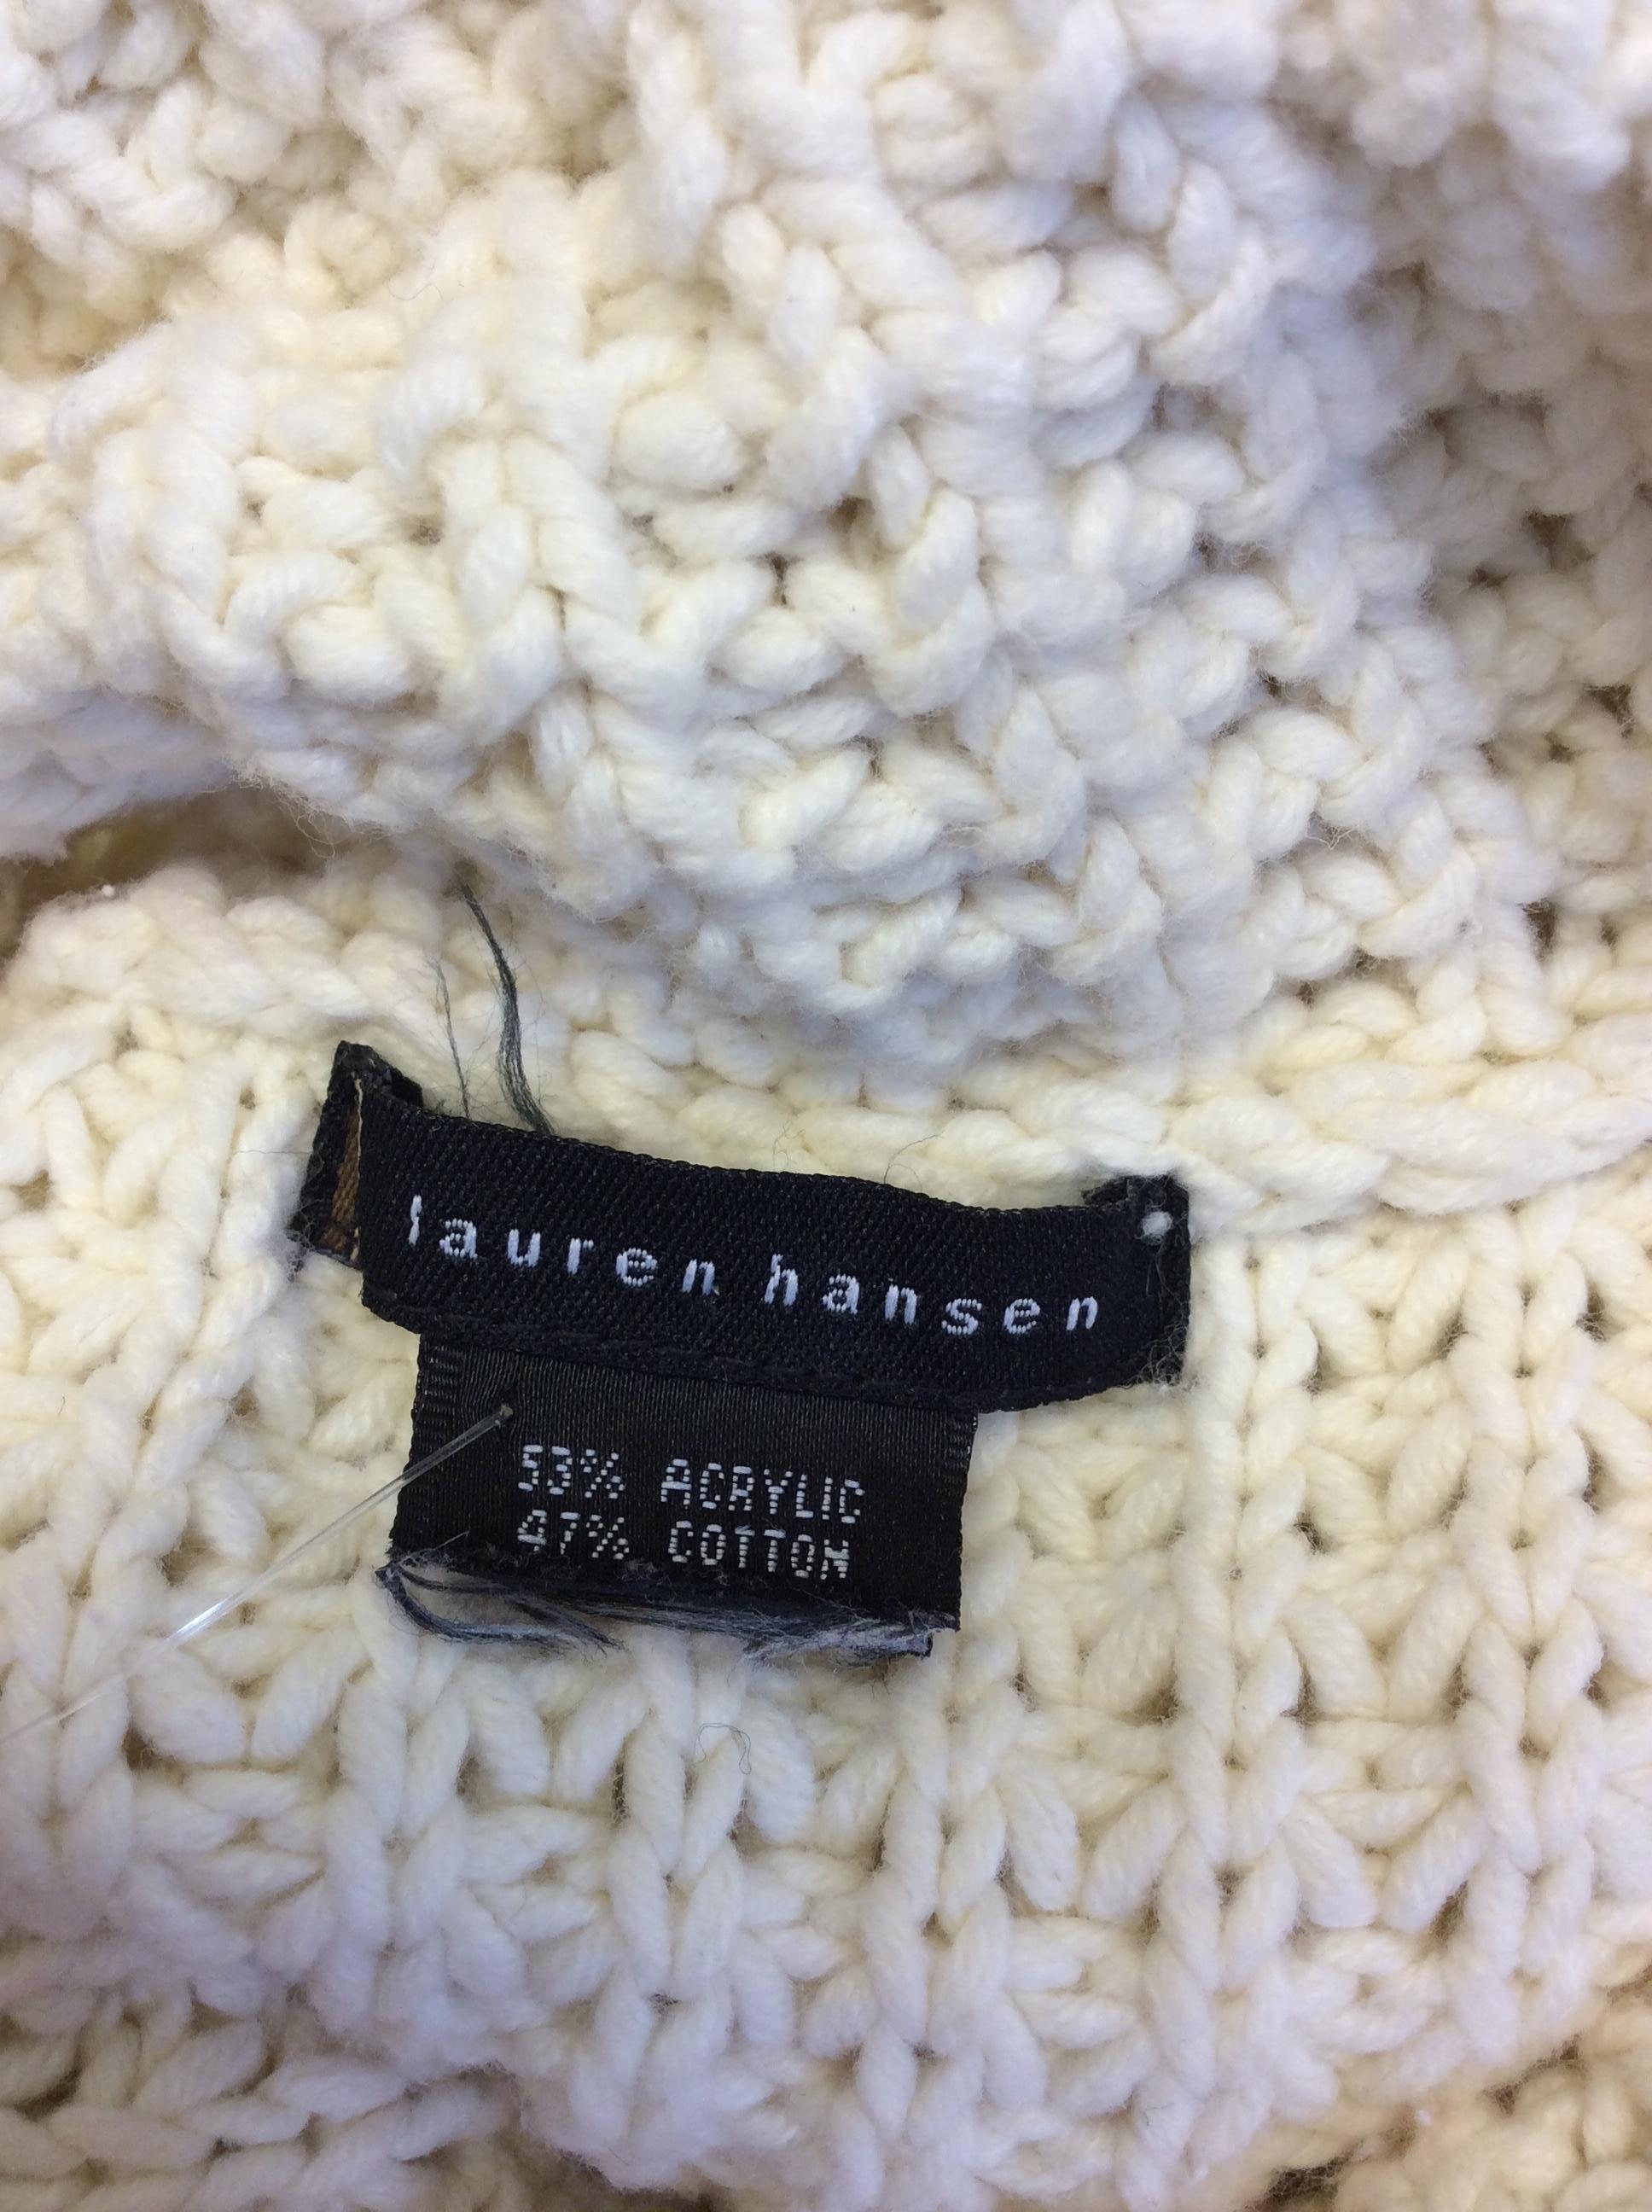 Lauren Hansen Off White Knit Sweater In Excellent Condition For Sale In Narberth, PA